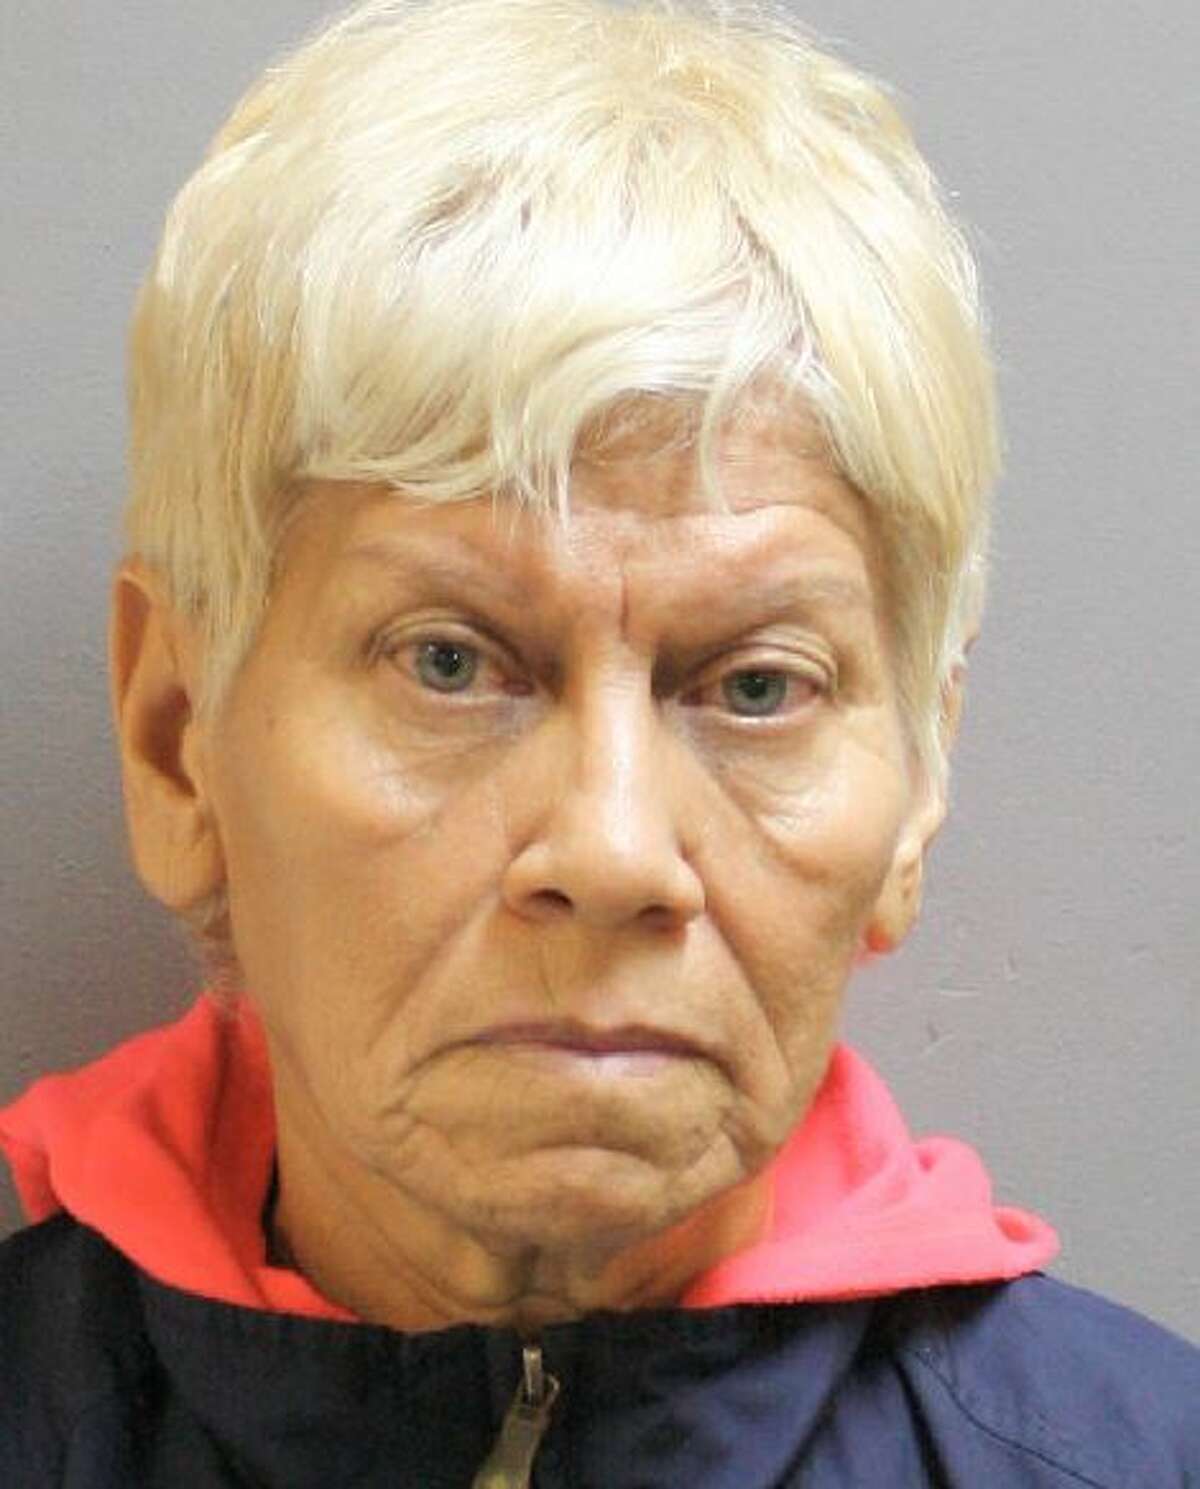 A 68-year-old Houston woman, Amalia Barnette, was sentenced to four years in prison on Wednesday for posing as an ICE agent and promising a woman she could help her husband become a U.S. citizen, according to court documents and the Harris County District Attorney's Office.